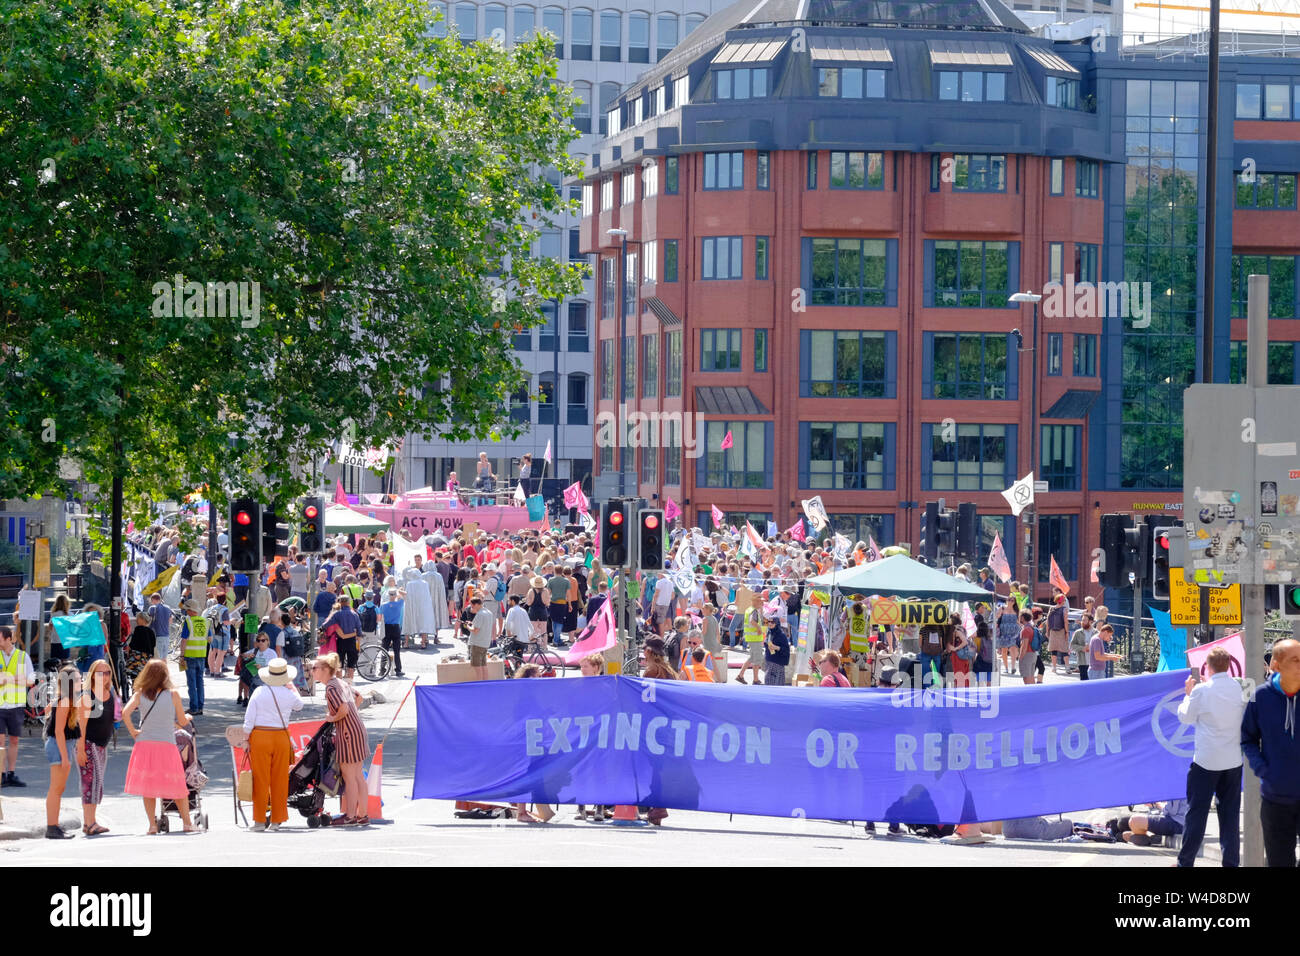 As part of the Extinction rebellion movement summer uprising a group have occupied Bristol Bridge in the center of the city. The protest is to raise a Stock Photo